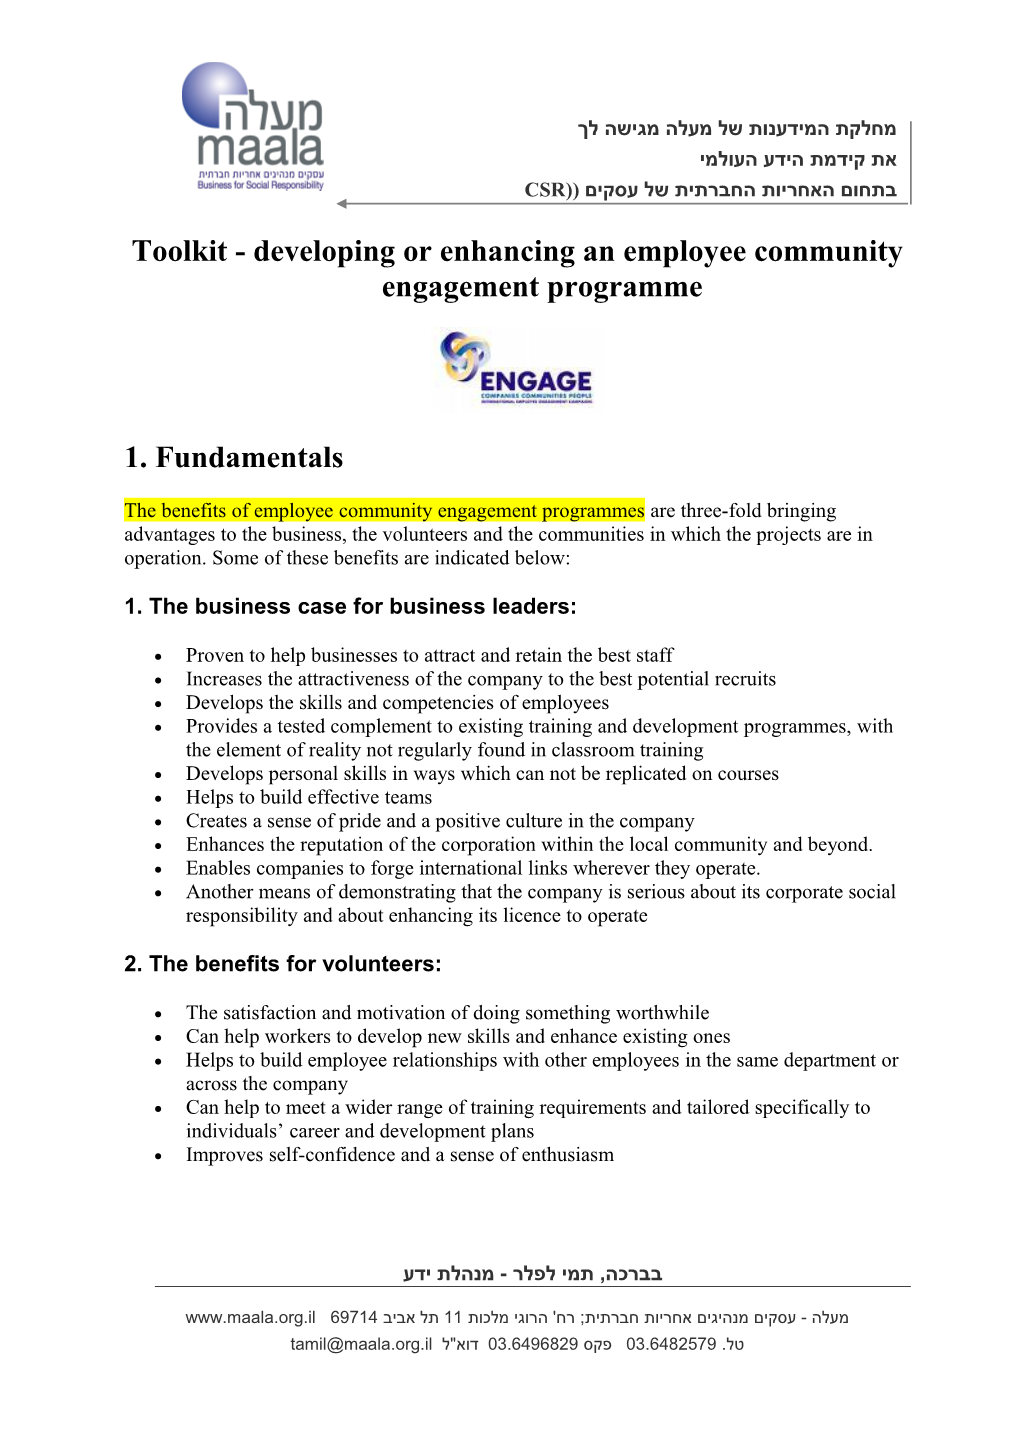 Toolkit - Developing Or Enhancing an Employee Community Engagement Programme